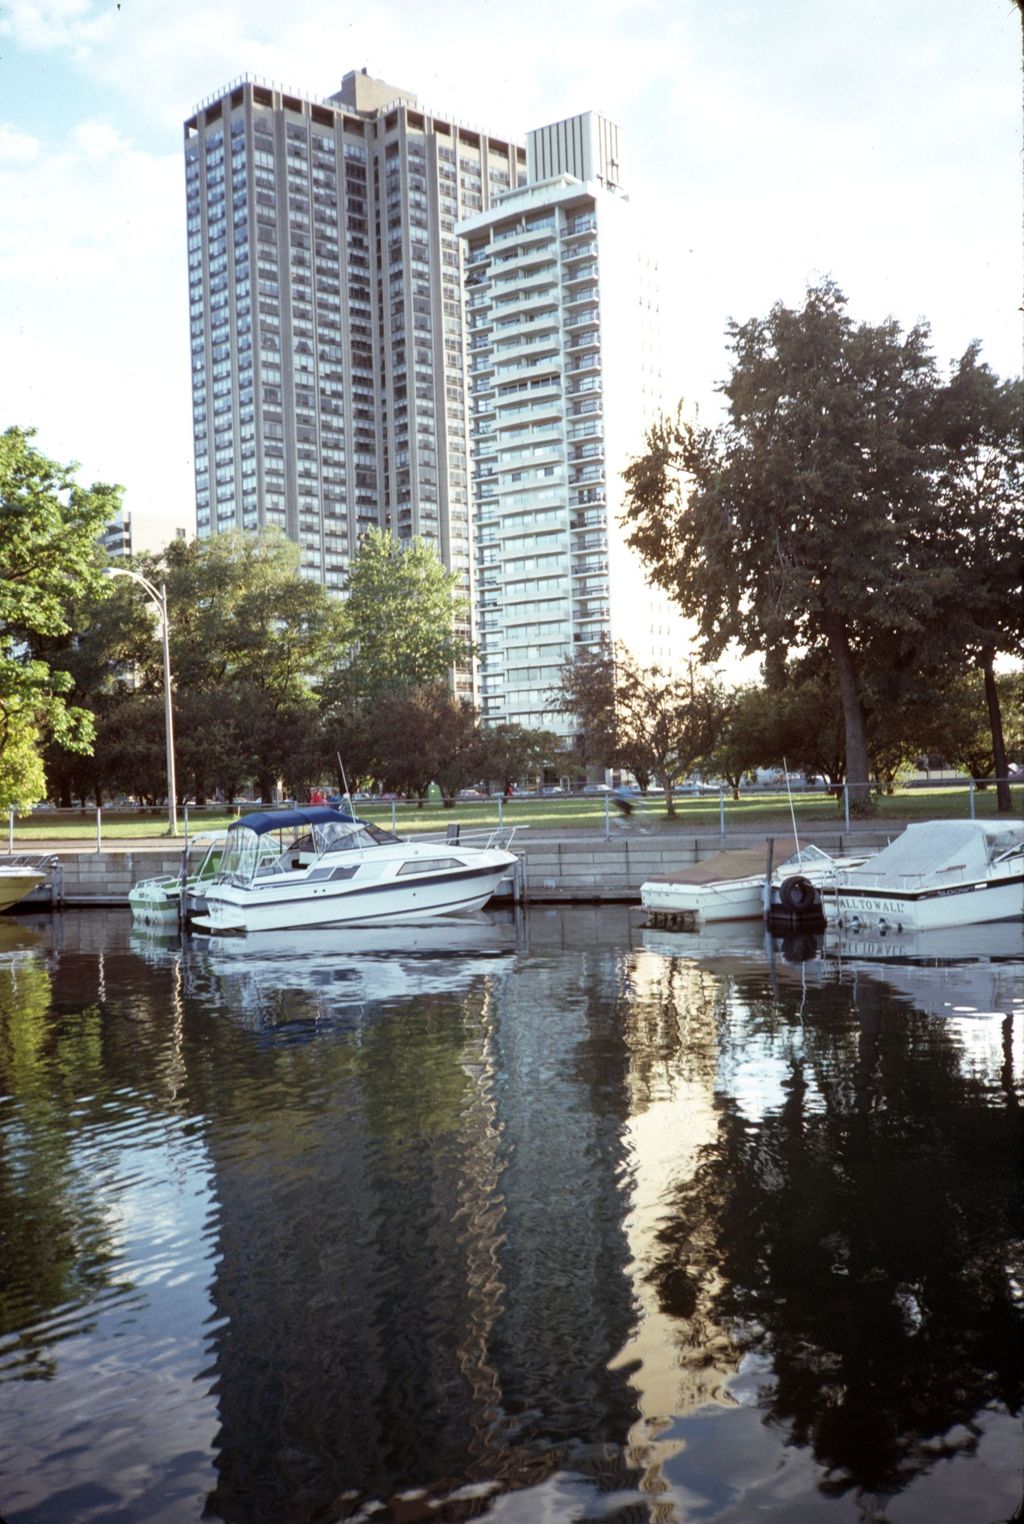 Miniature of Belmont Harbor and North Lake Shore Drive apartment buildings